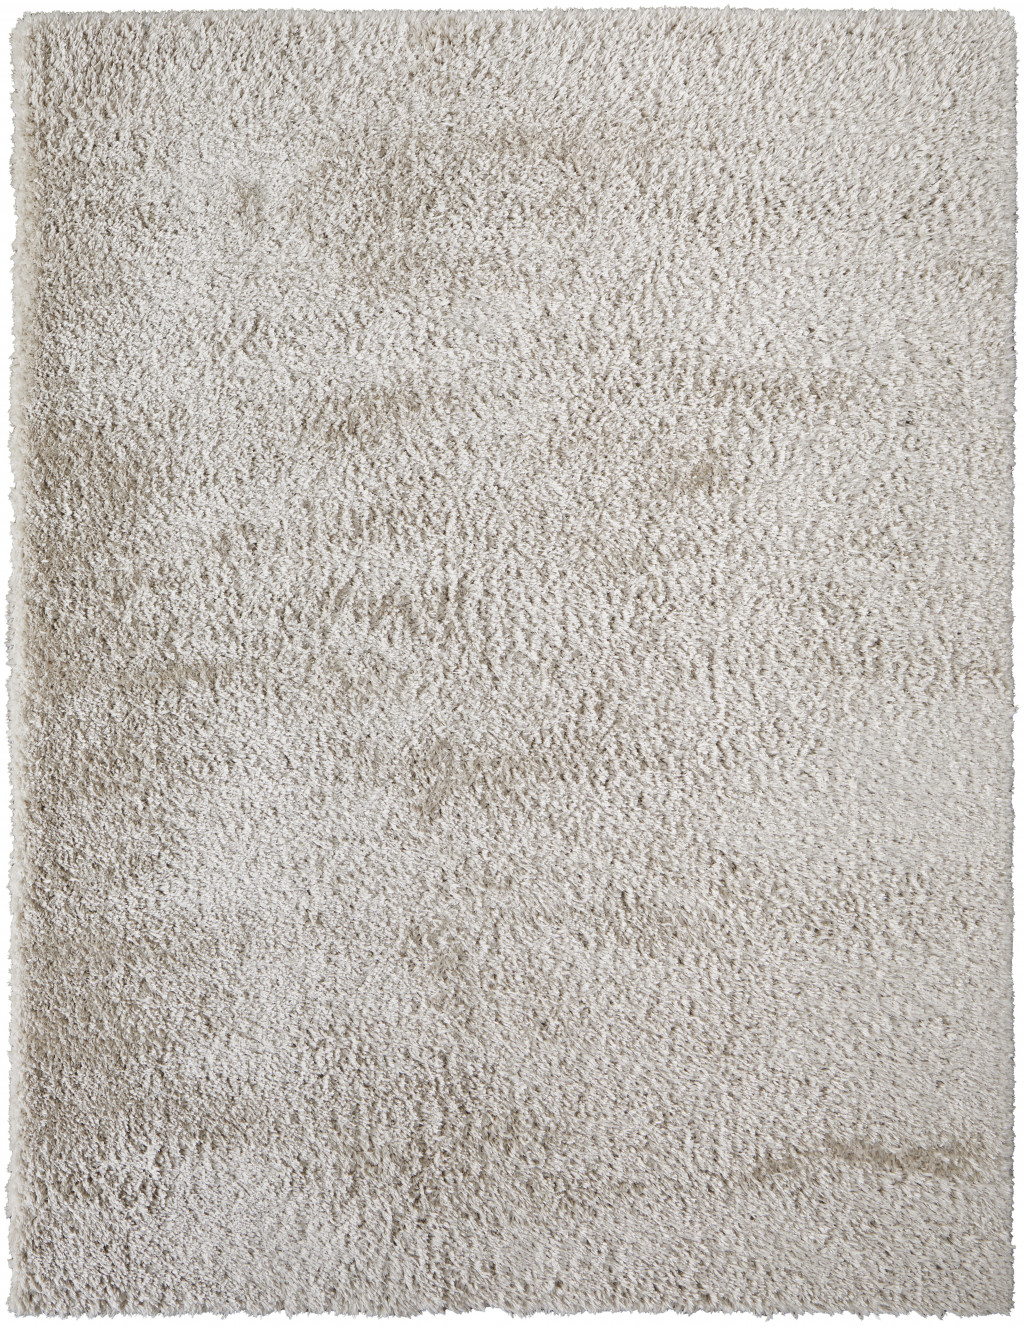 9' X 12' Ivory Shag Power Loom Stain Resistant Area Rug-513415-1